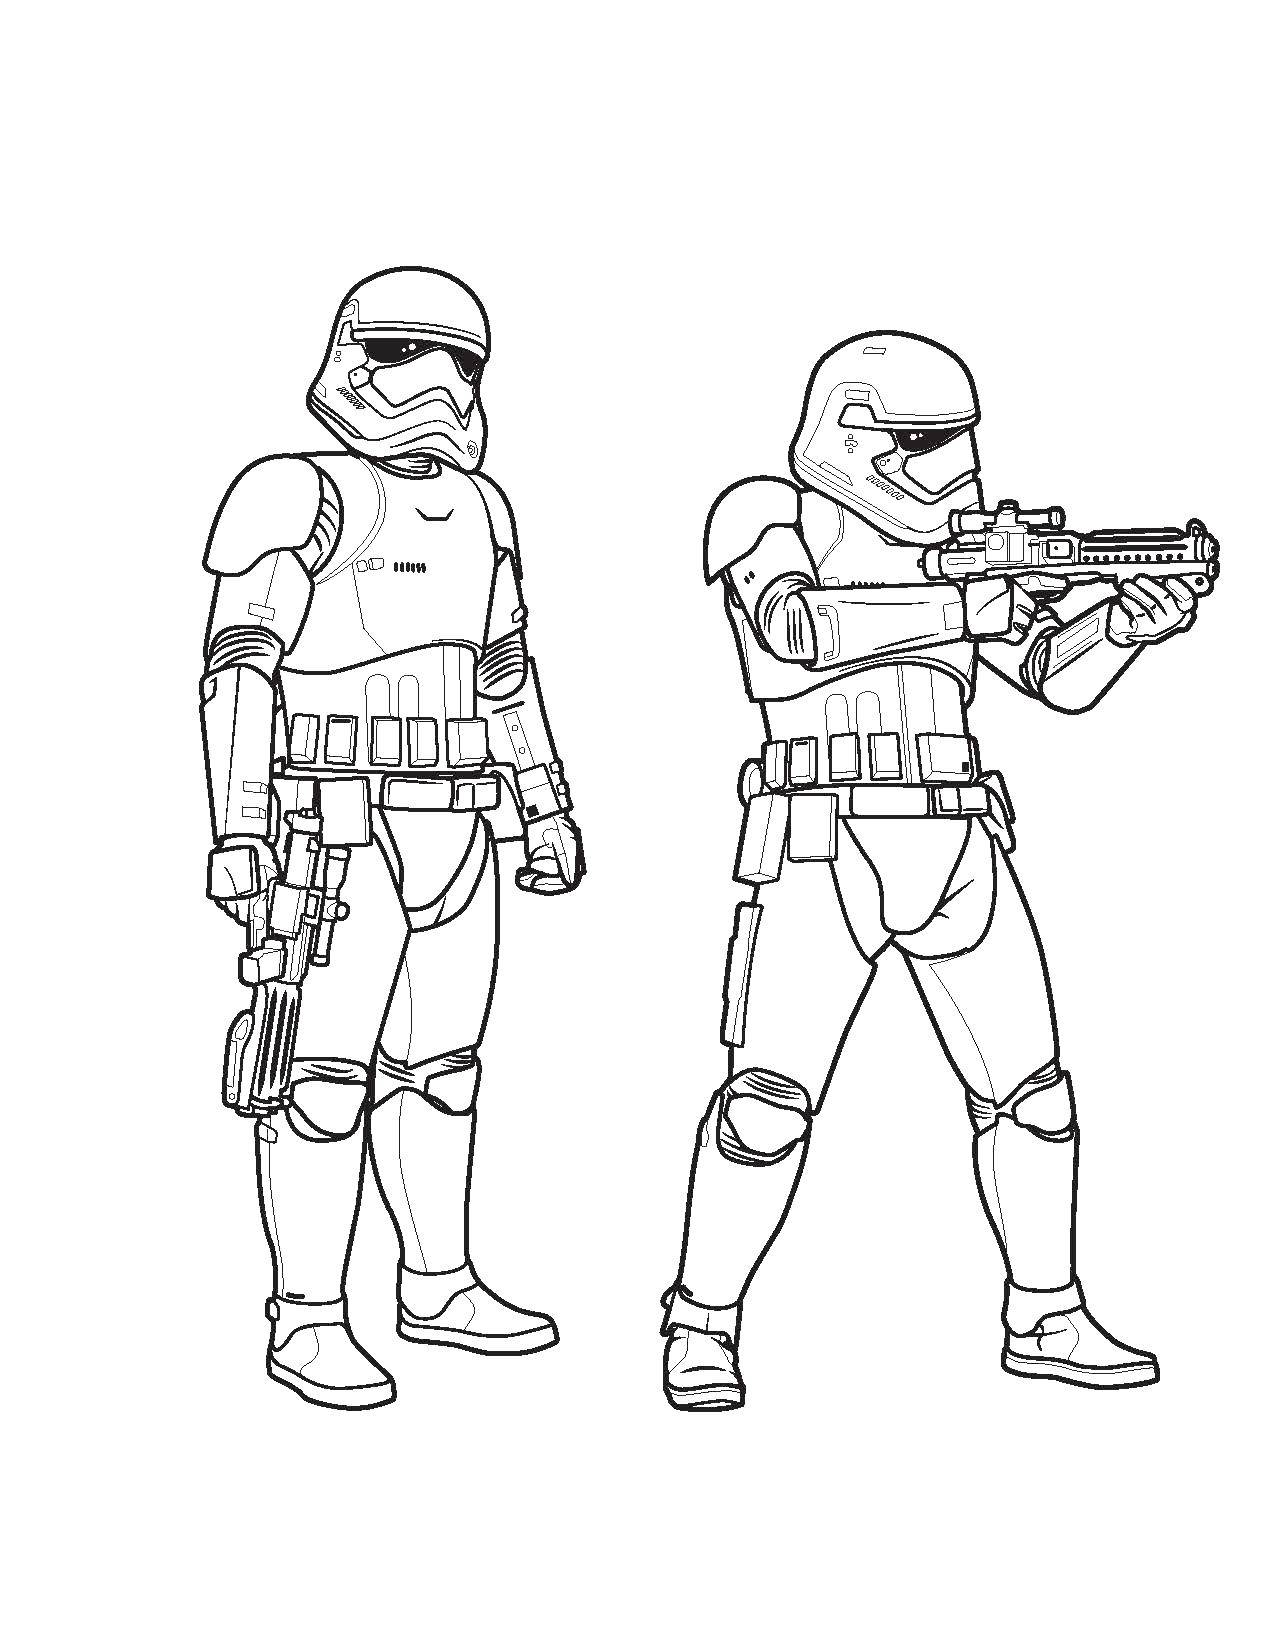 Coloring Star wars. soldiers from star wars weapons. Category star wars . Tags:  the future.